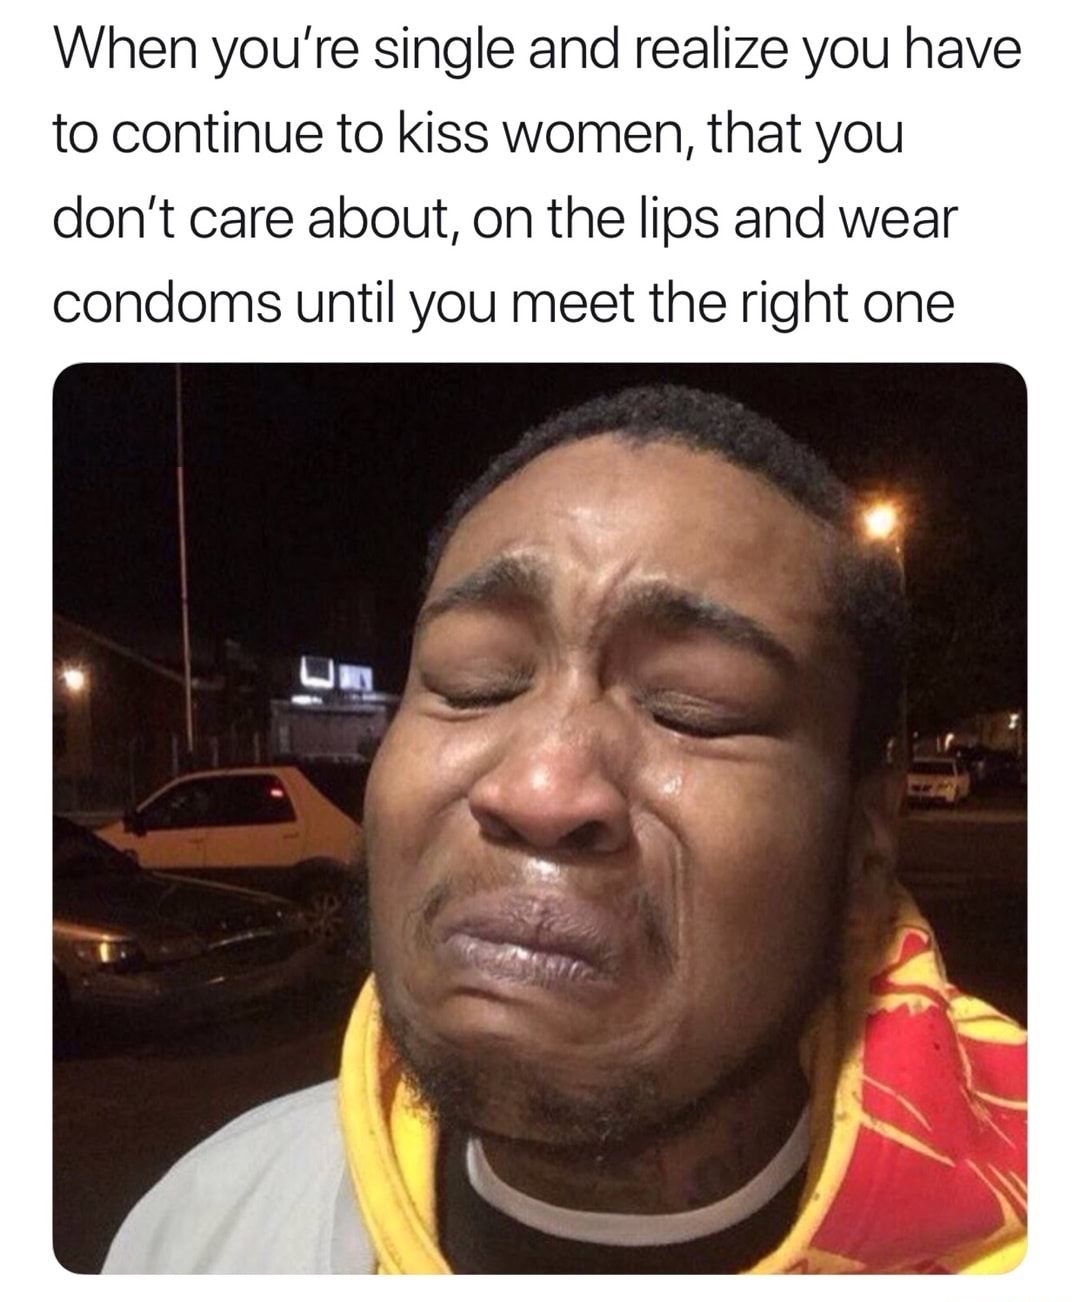 memes - mzansi funny - When you're single and realize you have to continue to kiss women, that you don't care about, on the lips and wear condoms until you meet the right one